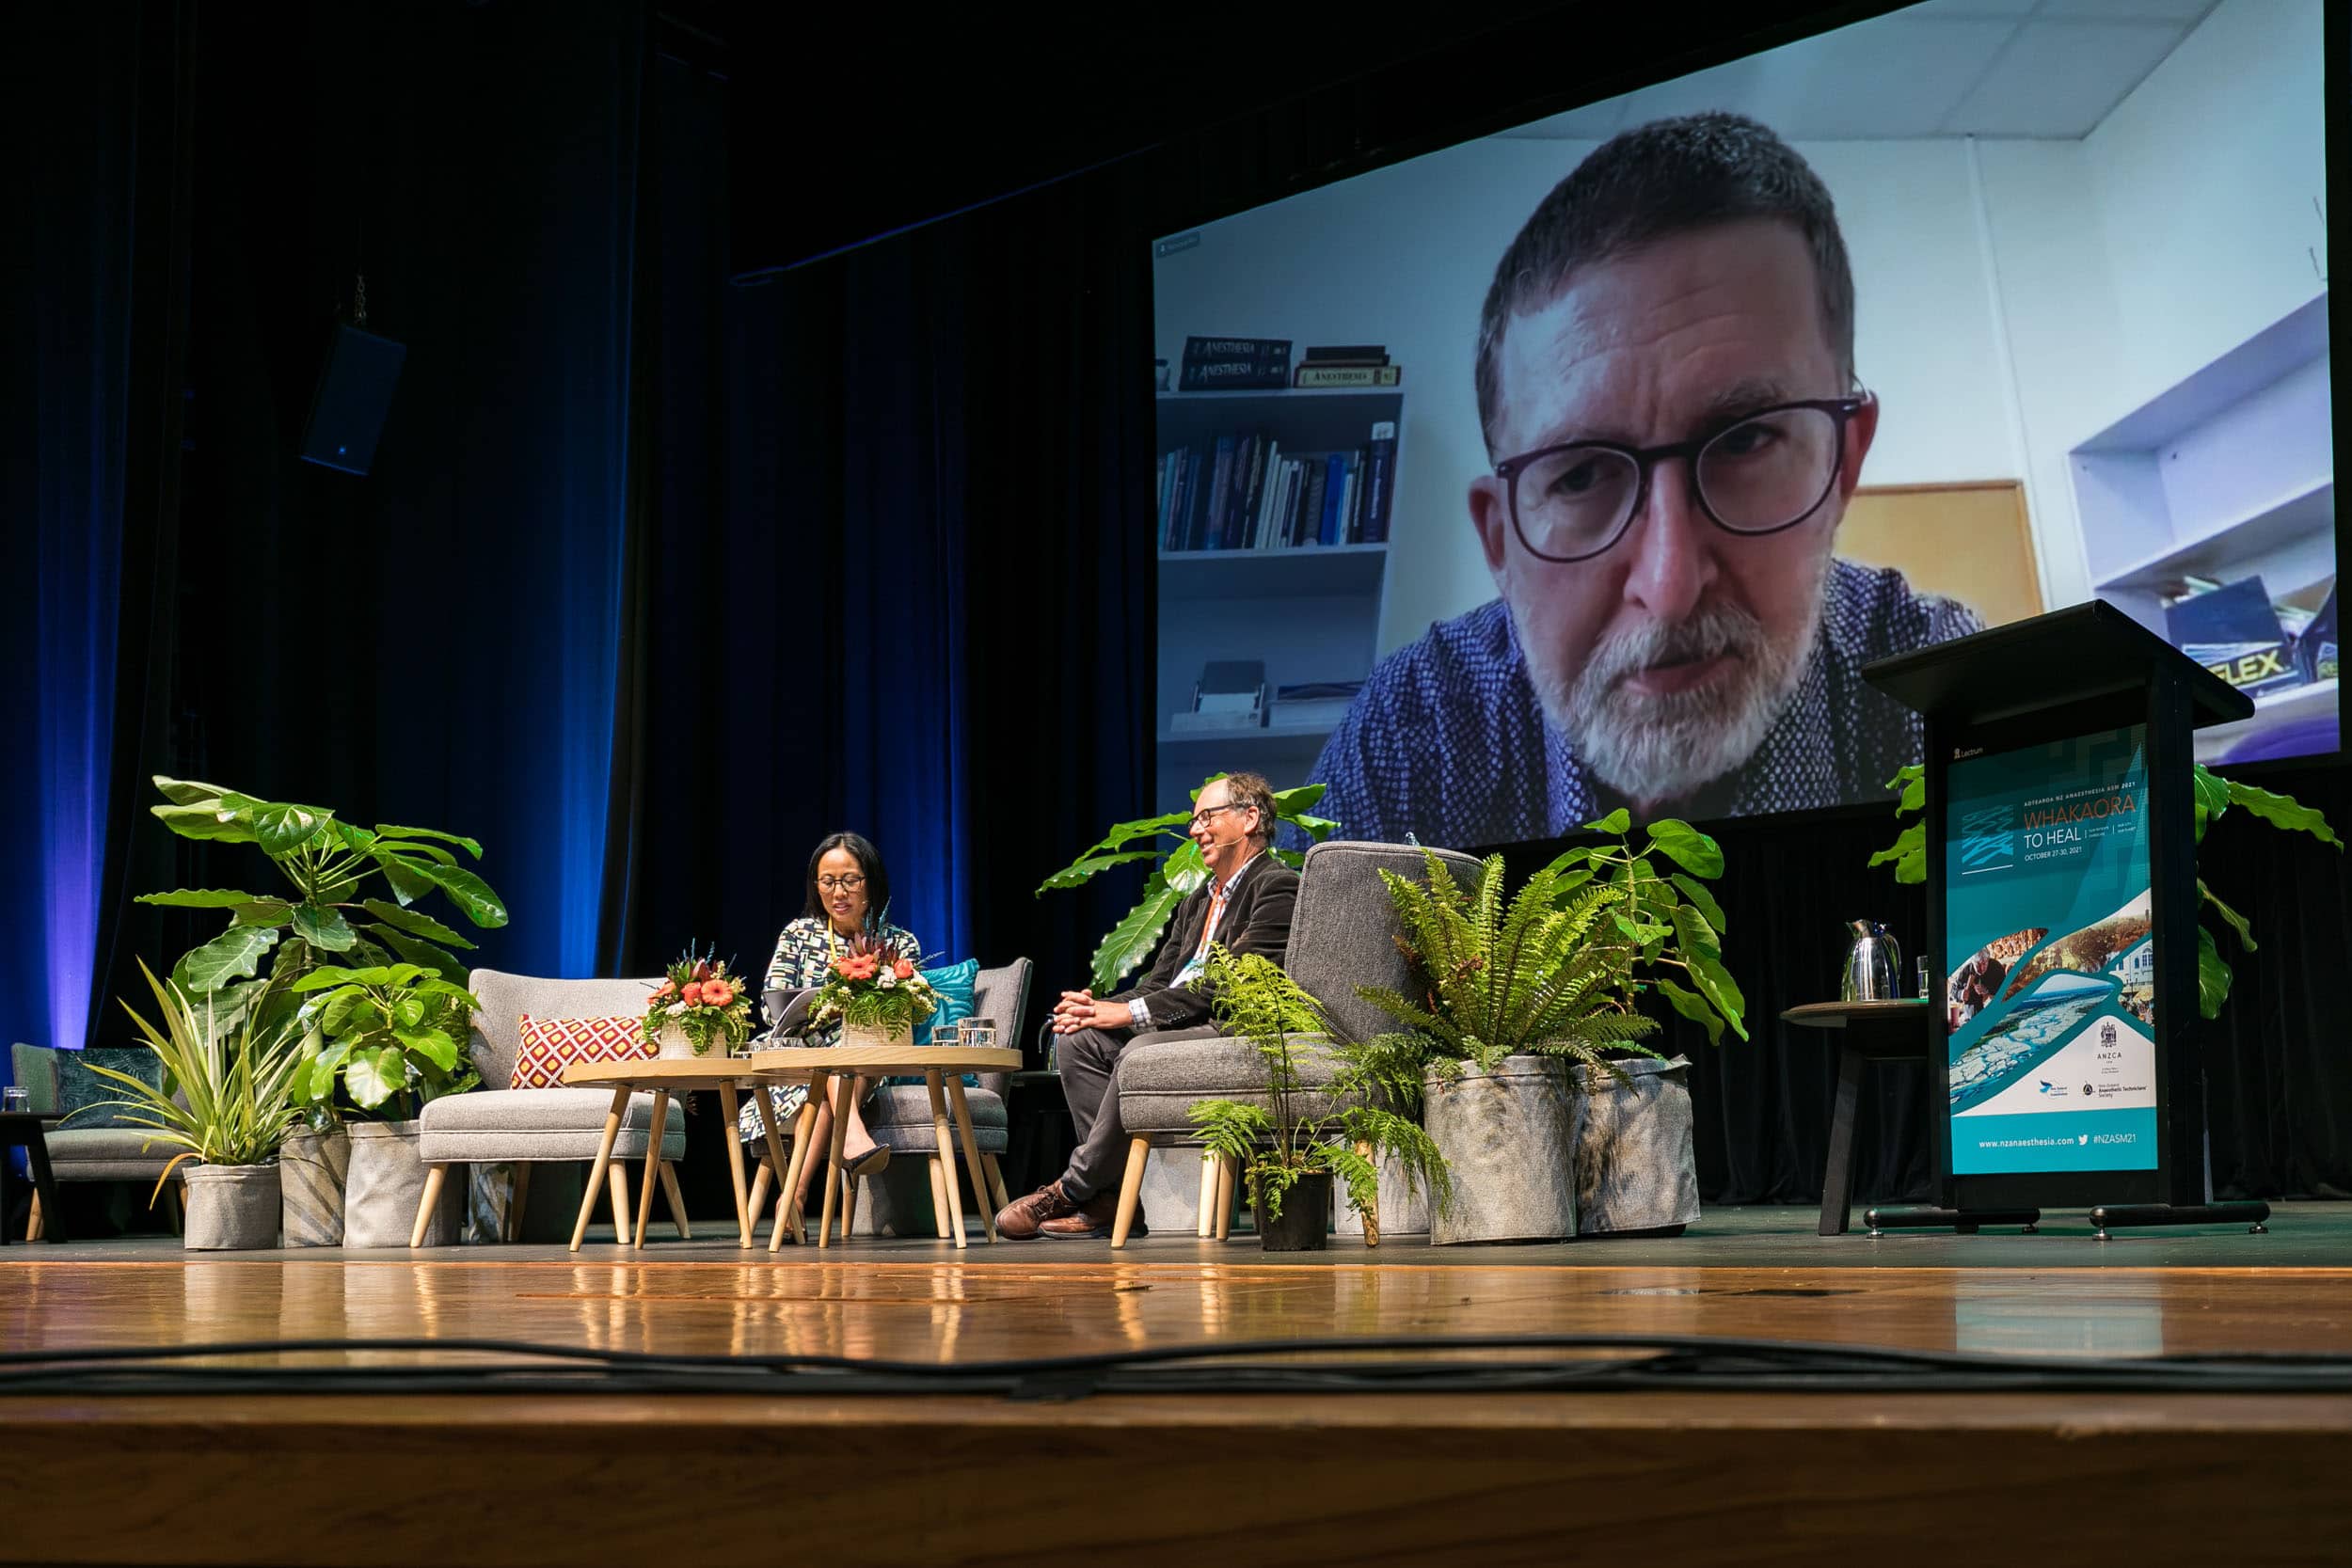 Guest presenter joins stage speakers remotely on screen during conference session Te Pae Christchurch.